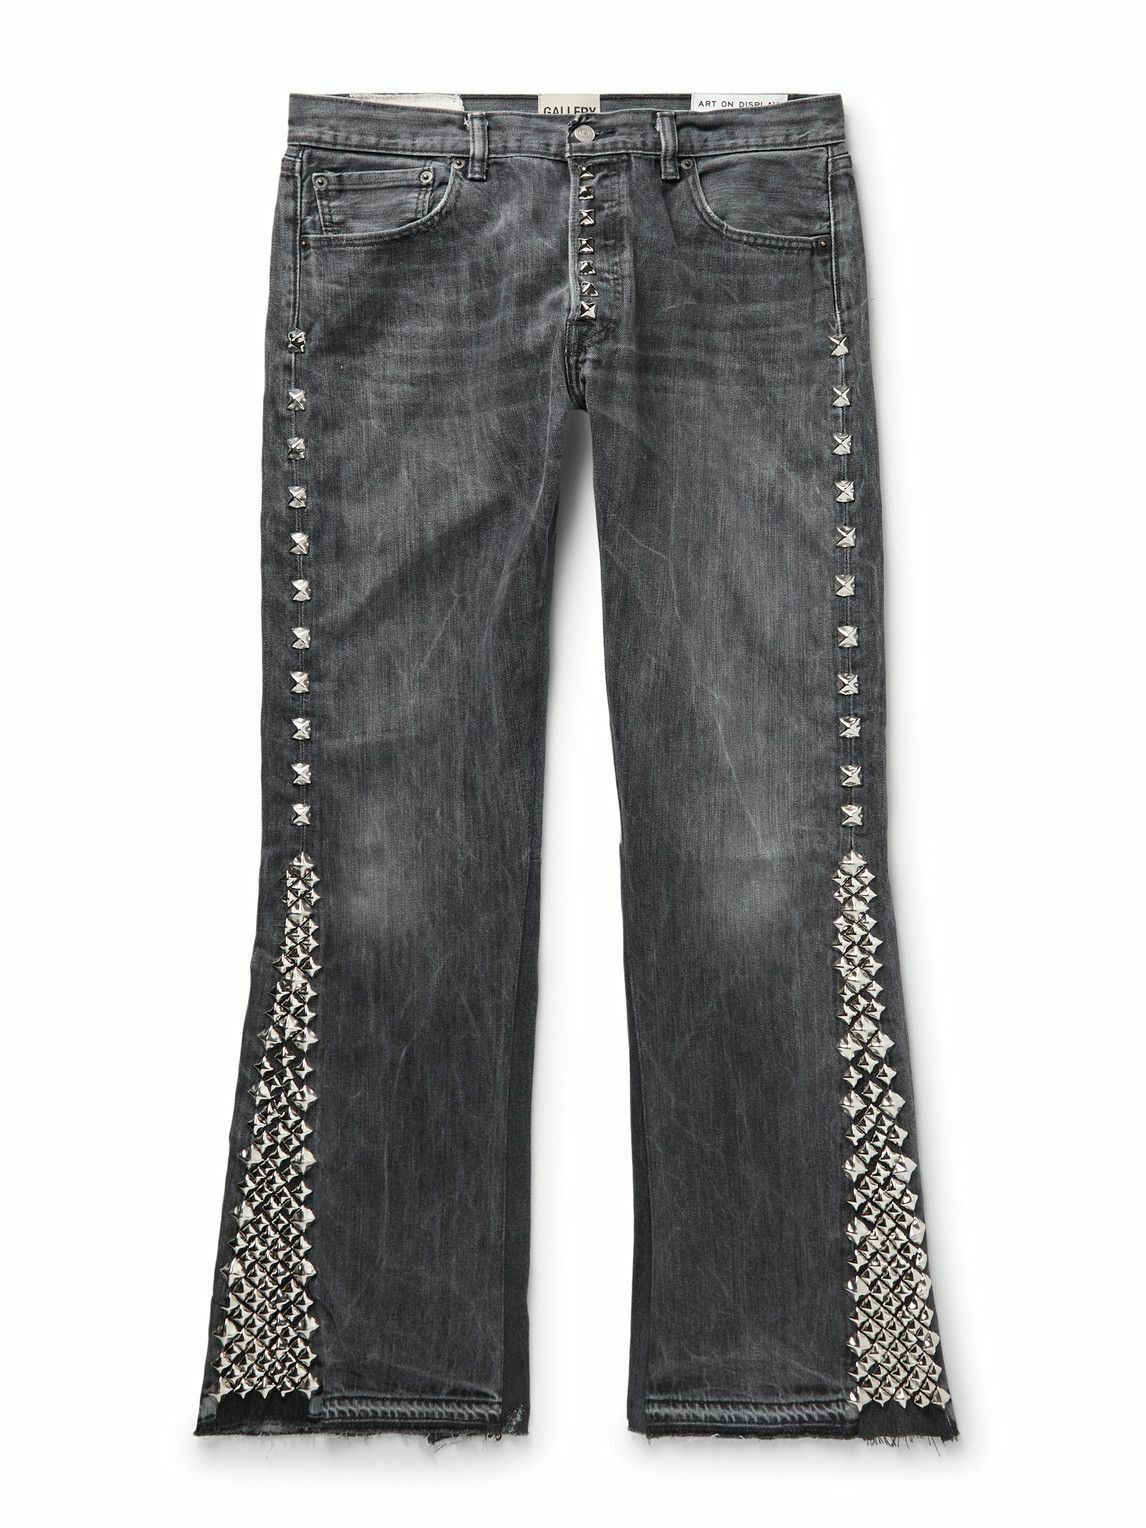 Gallery Dept. - LA Slim-Fit Flared Frayed Studded Jeans - Gray Gallery ...